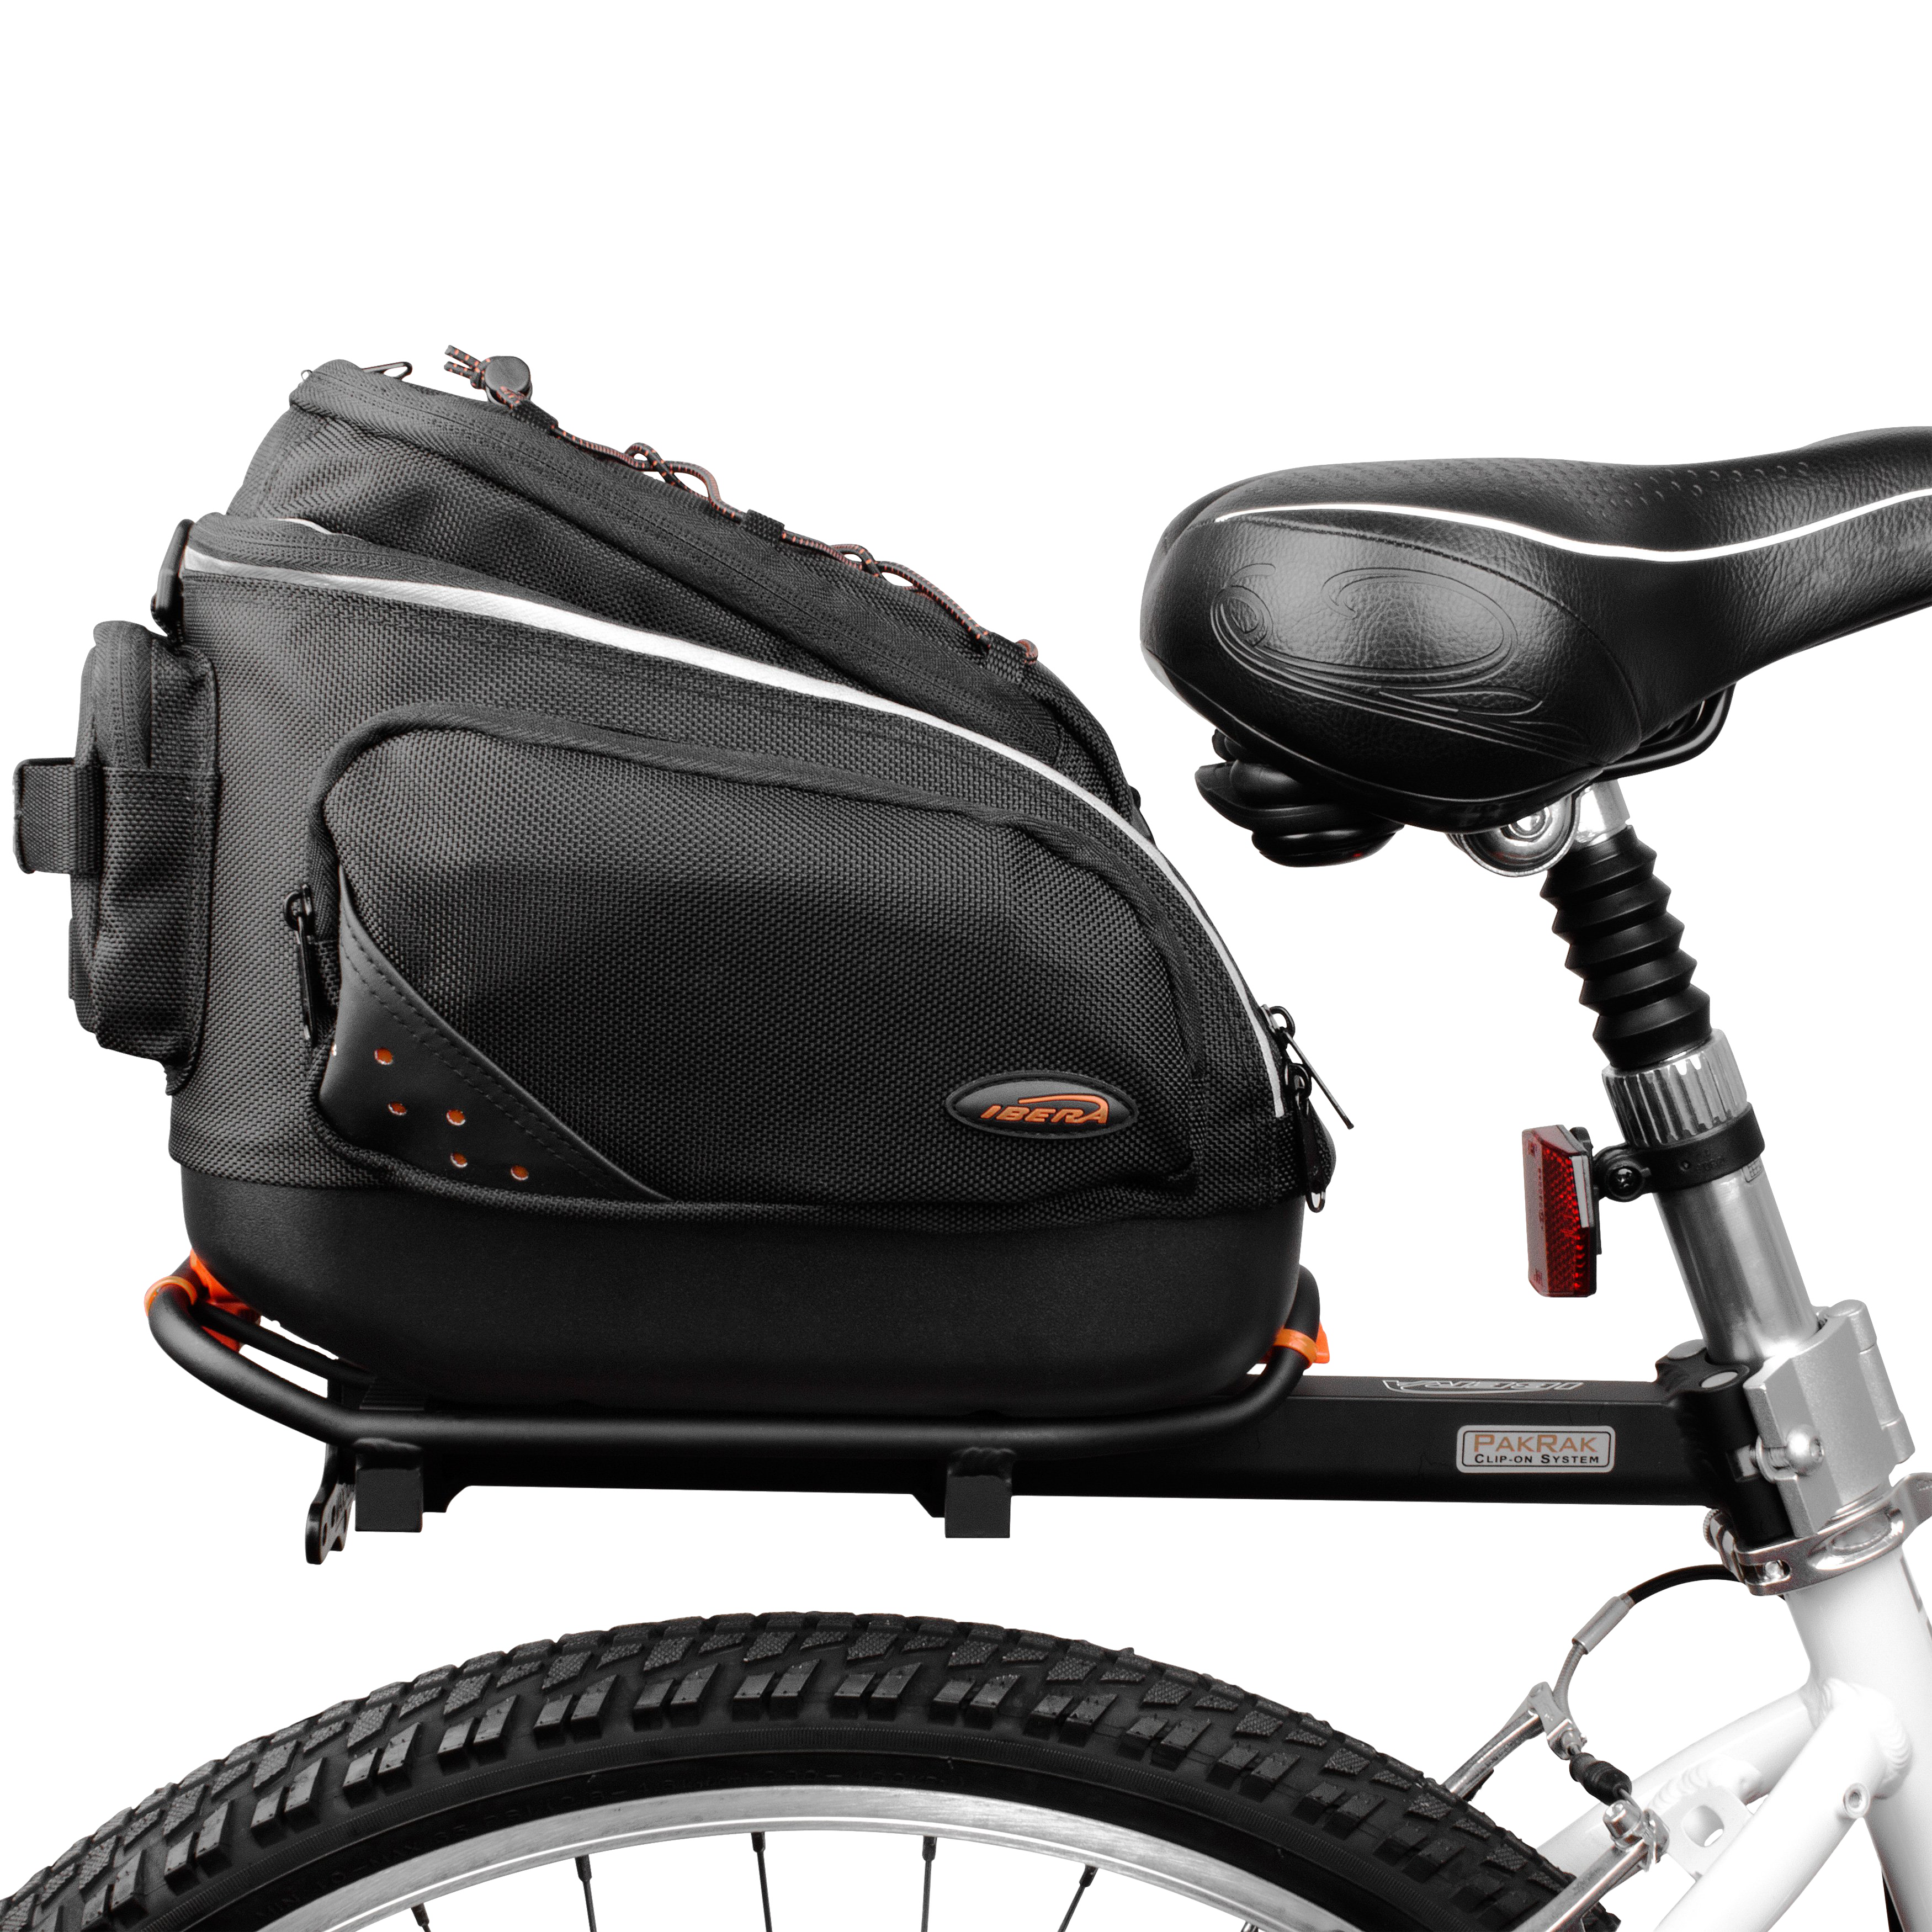 Bag and Carrier Attached to Bike